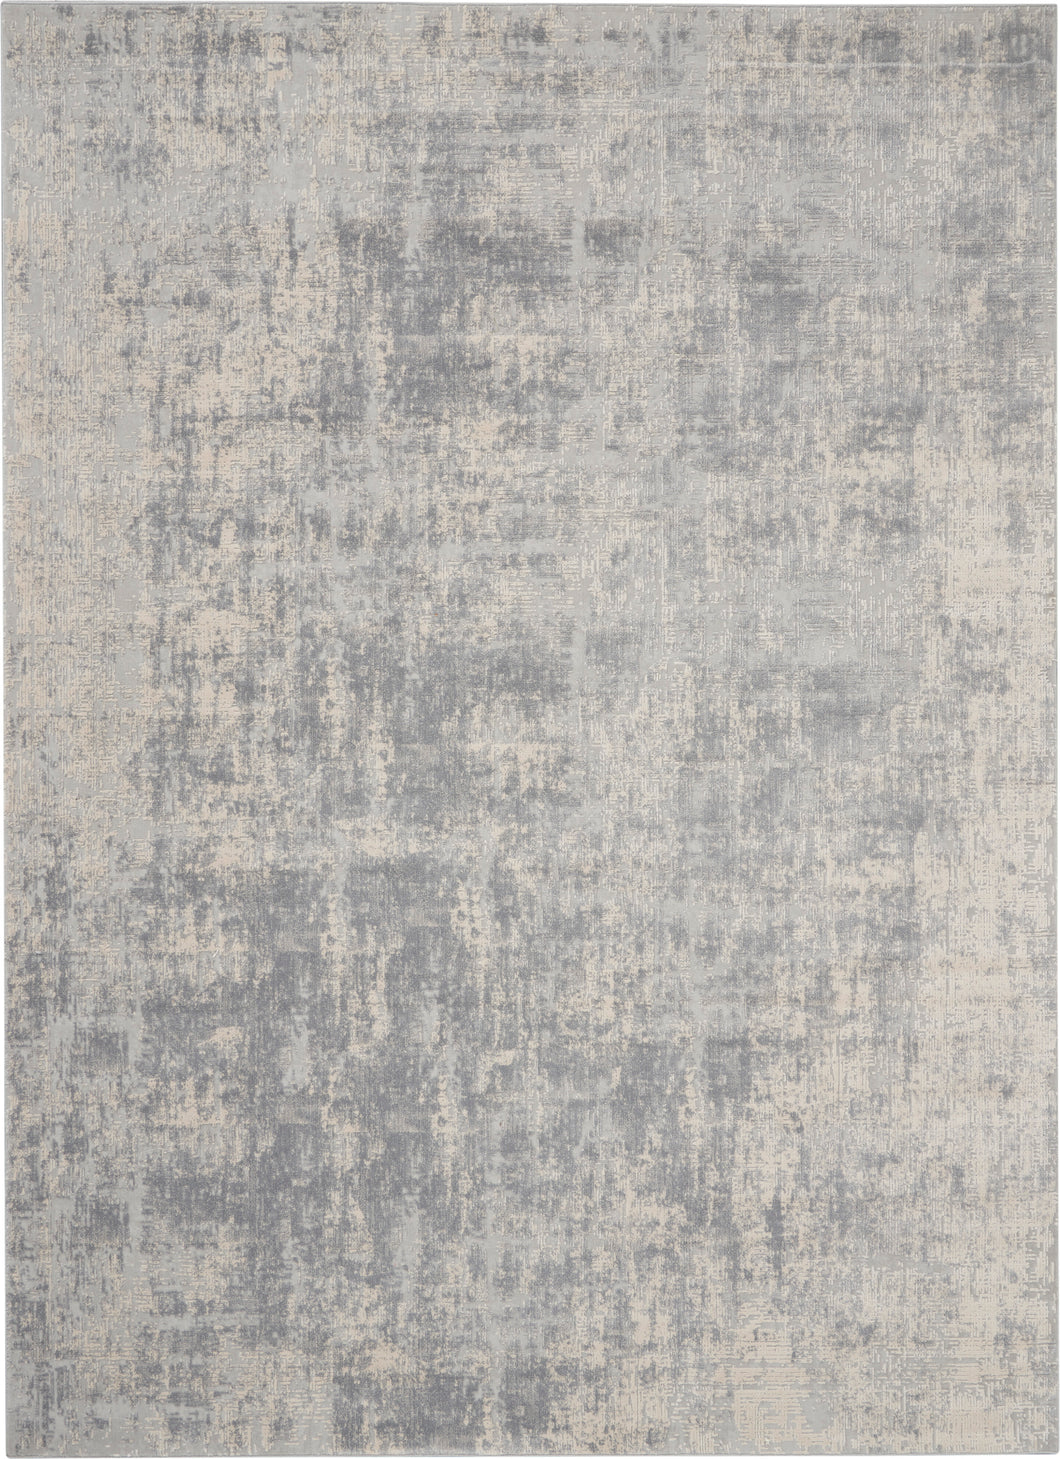 Nourison Rustic Textures RUS01 Ivory 9'x13' Oversized Textured Rug RUS01 Ivory/Silver